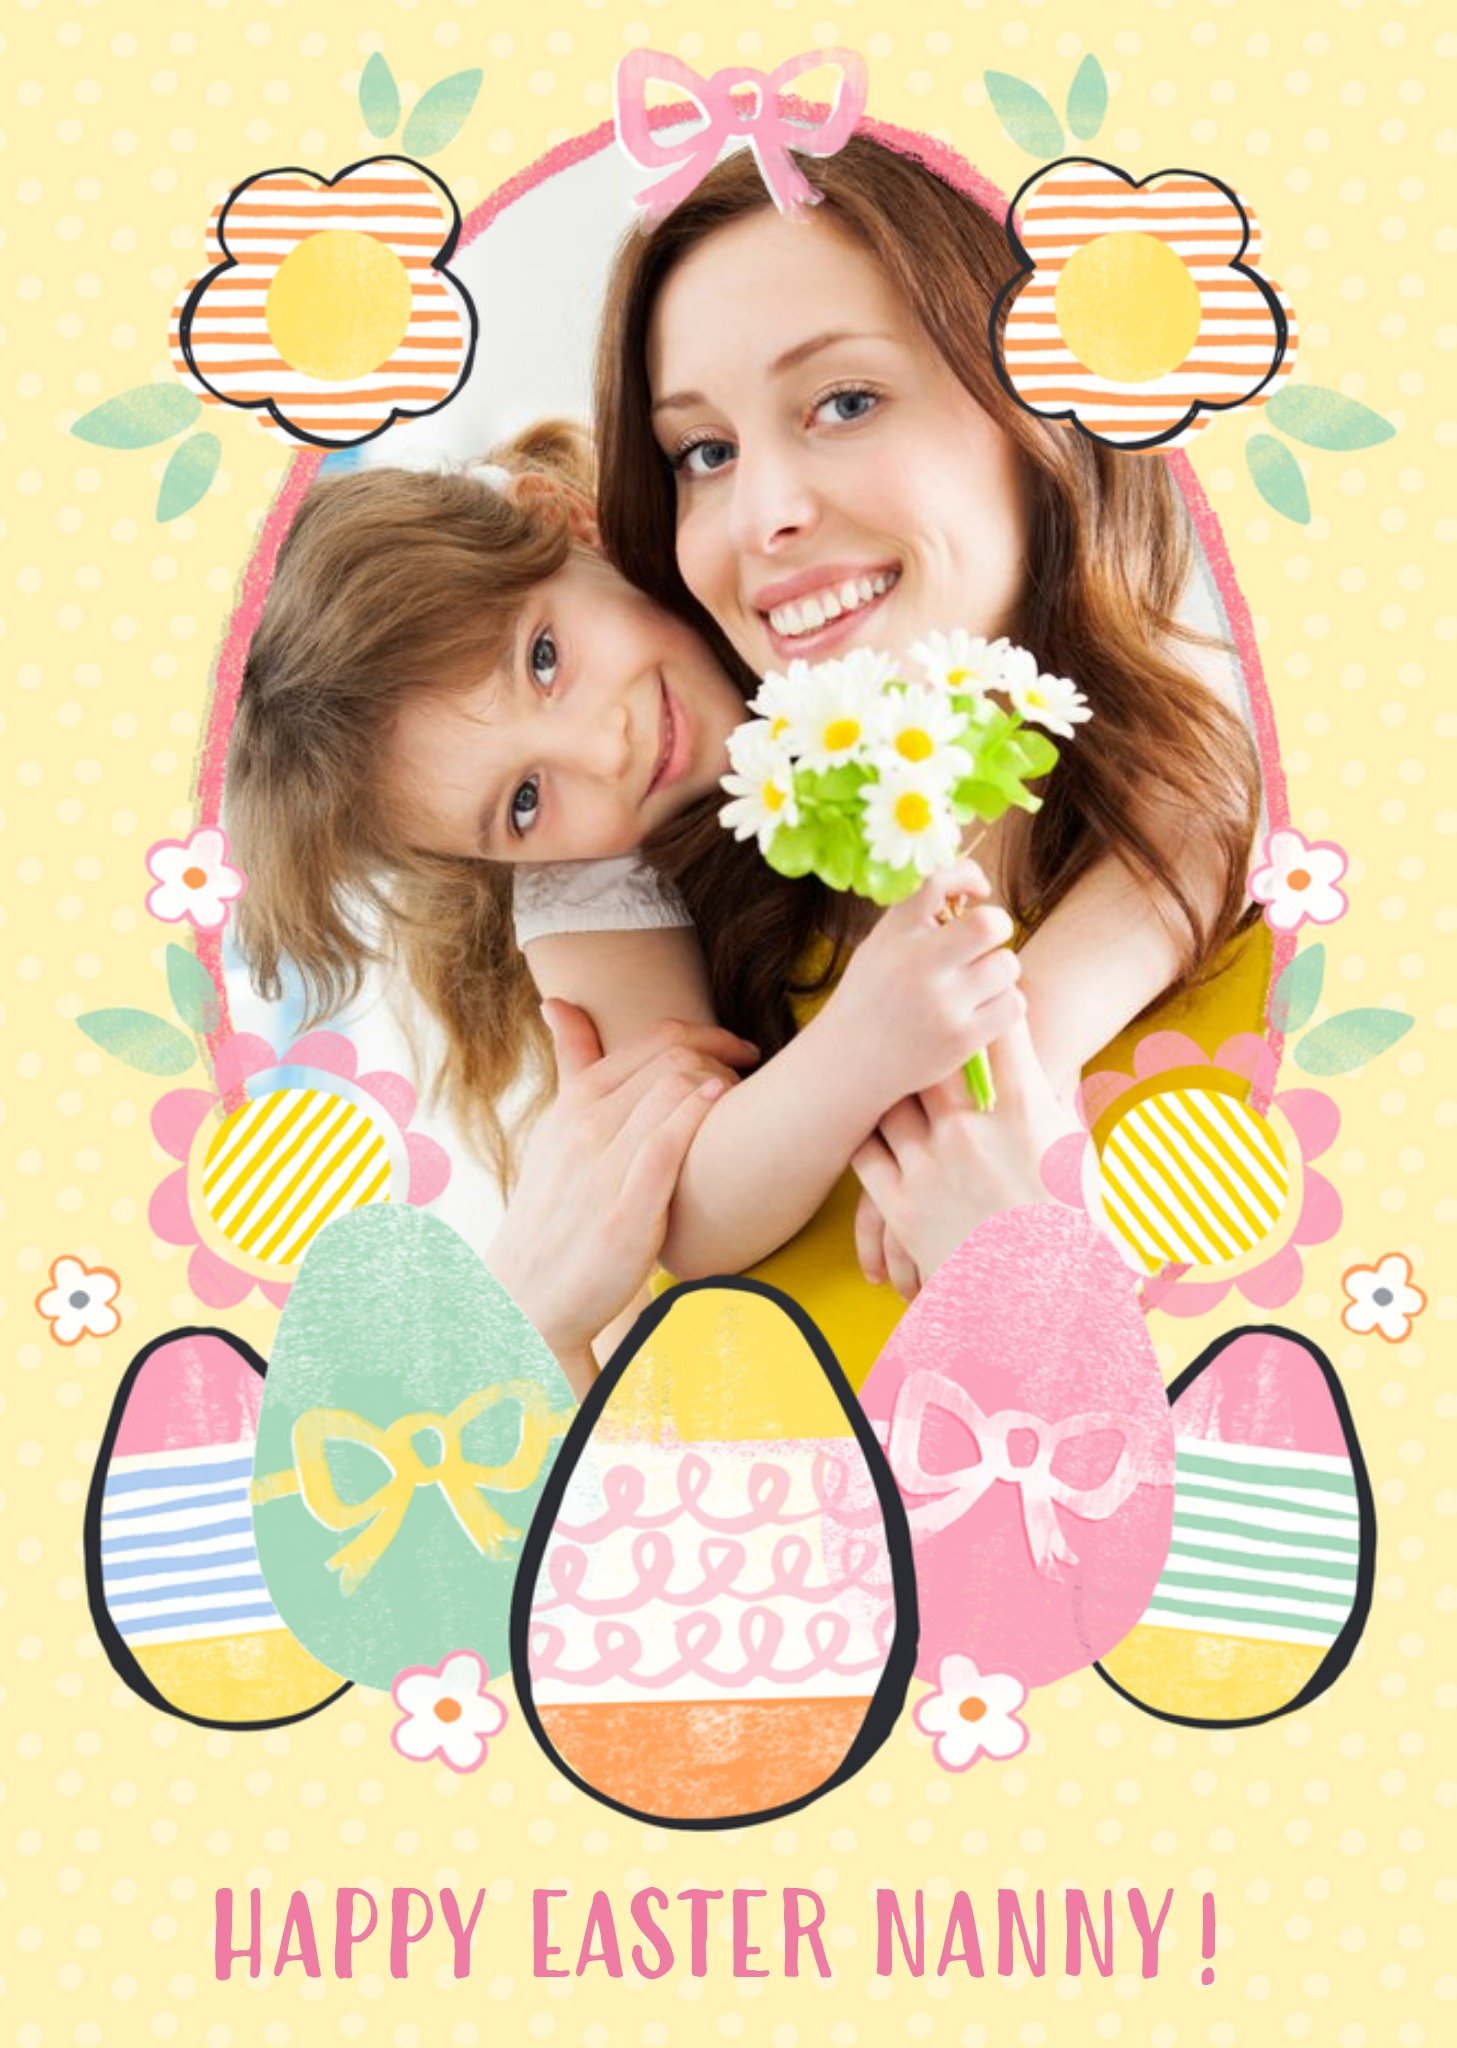 Moonpig Pastel Flowers And Eggs Happy Easter Photo Card Ecard